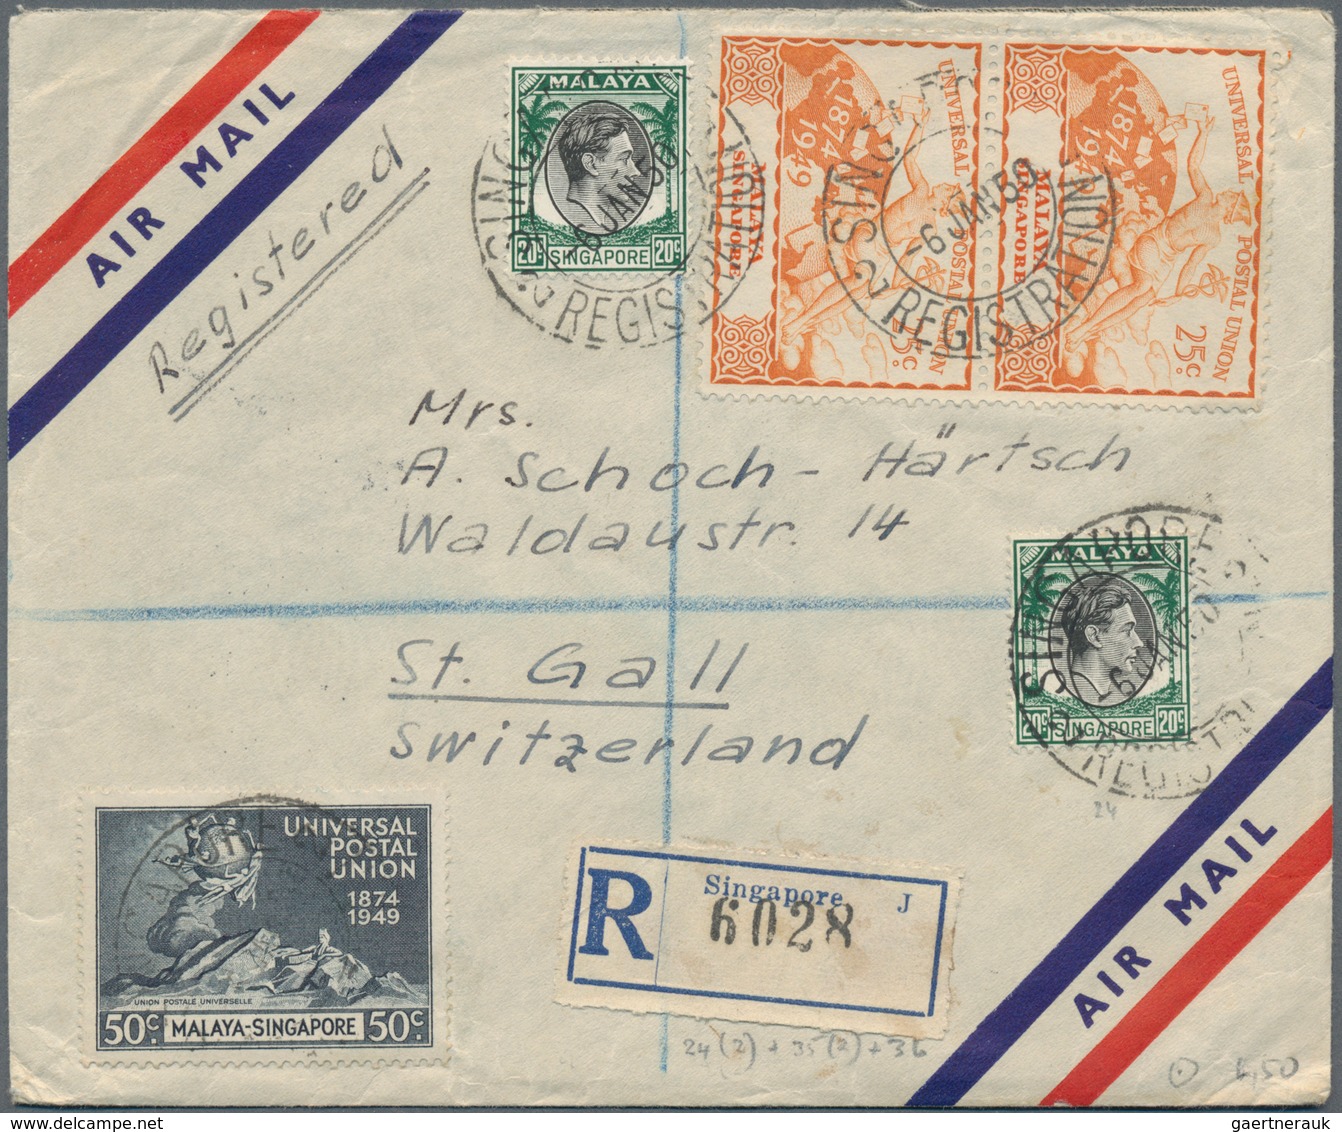 Singapur: 1949-50 Four airmail envelopes from Singapore to St. Gallen, Switzerland including three r